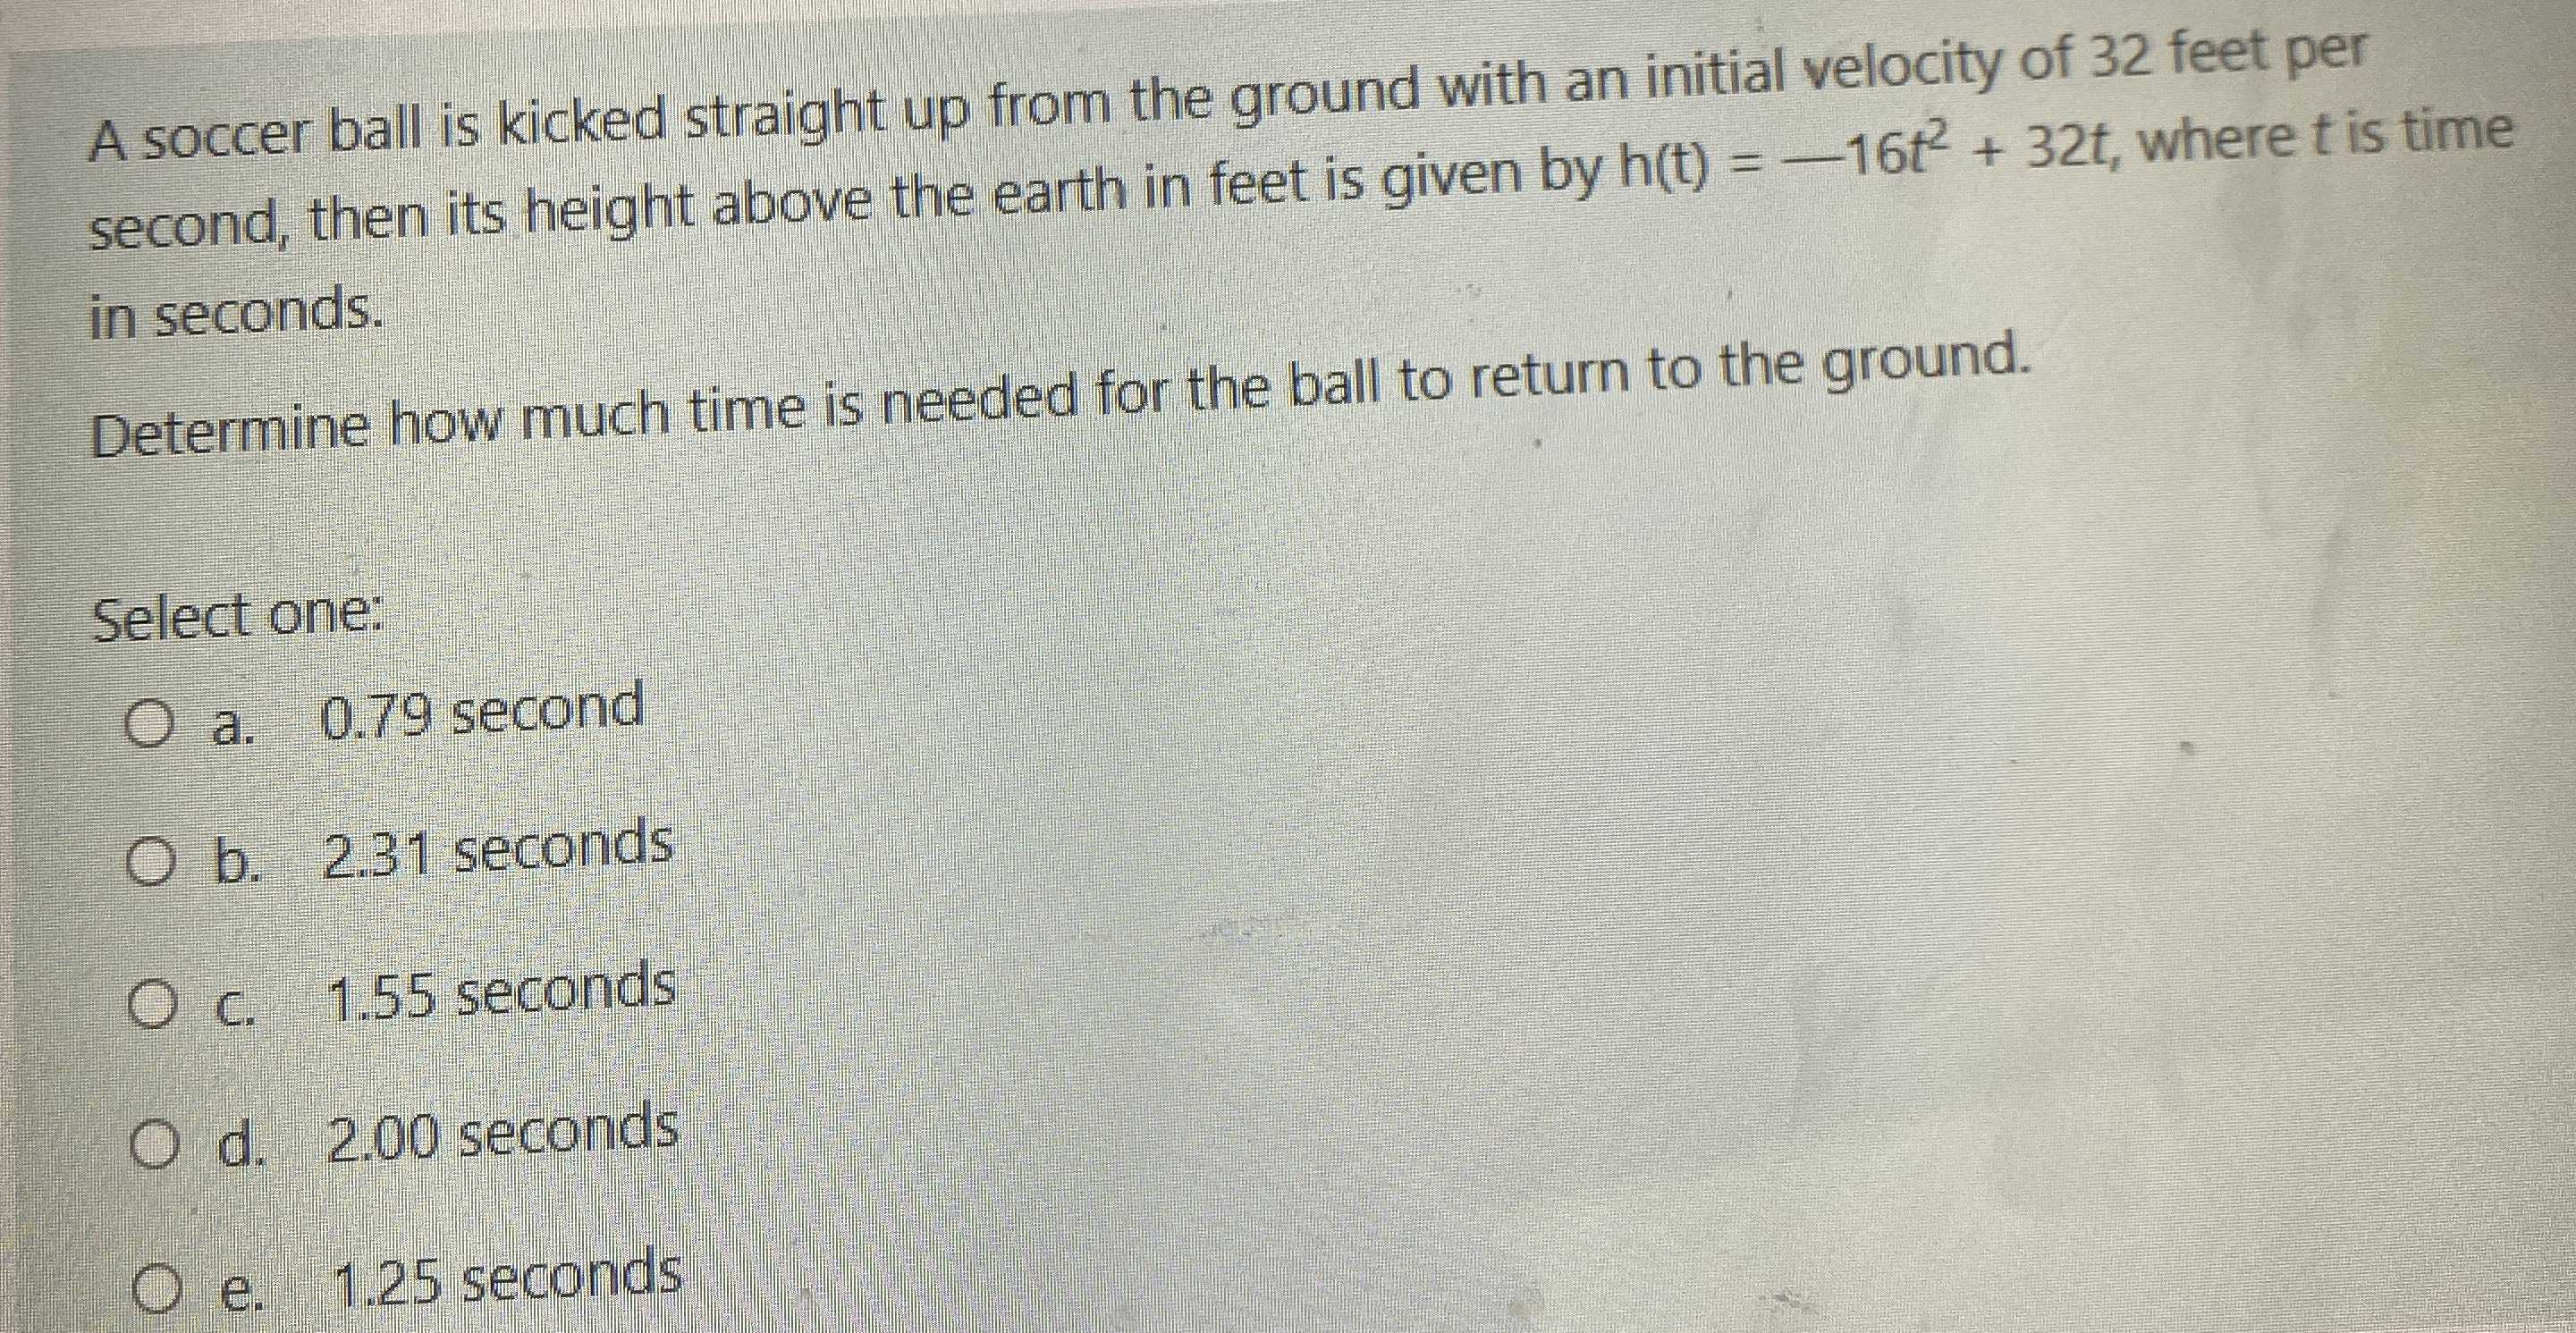 A soccer ball is kicked straight up from the groun...